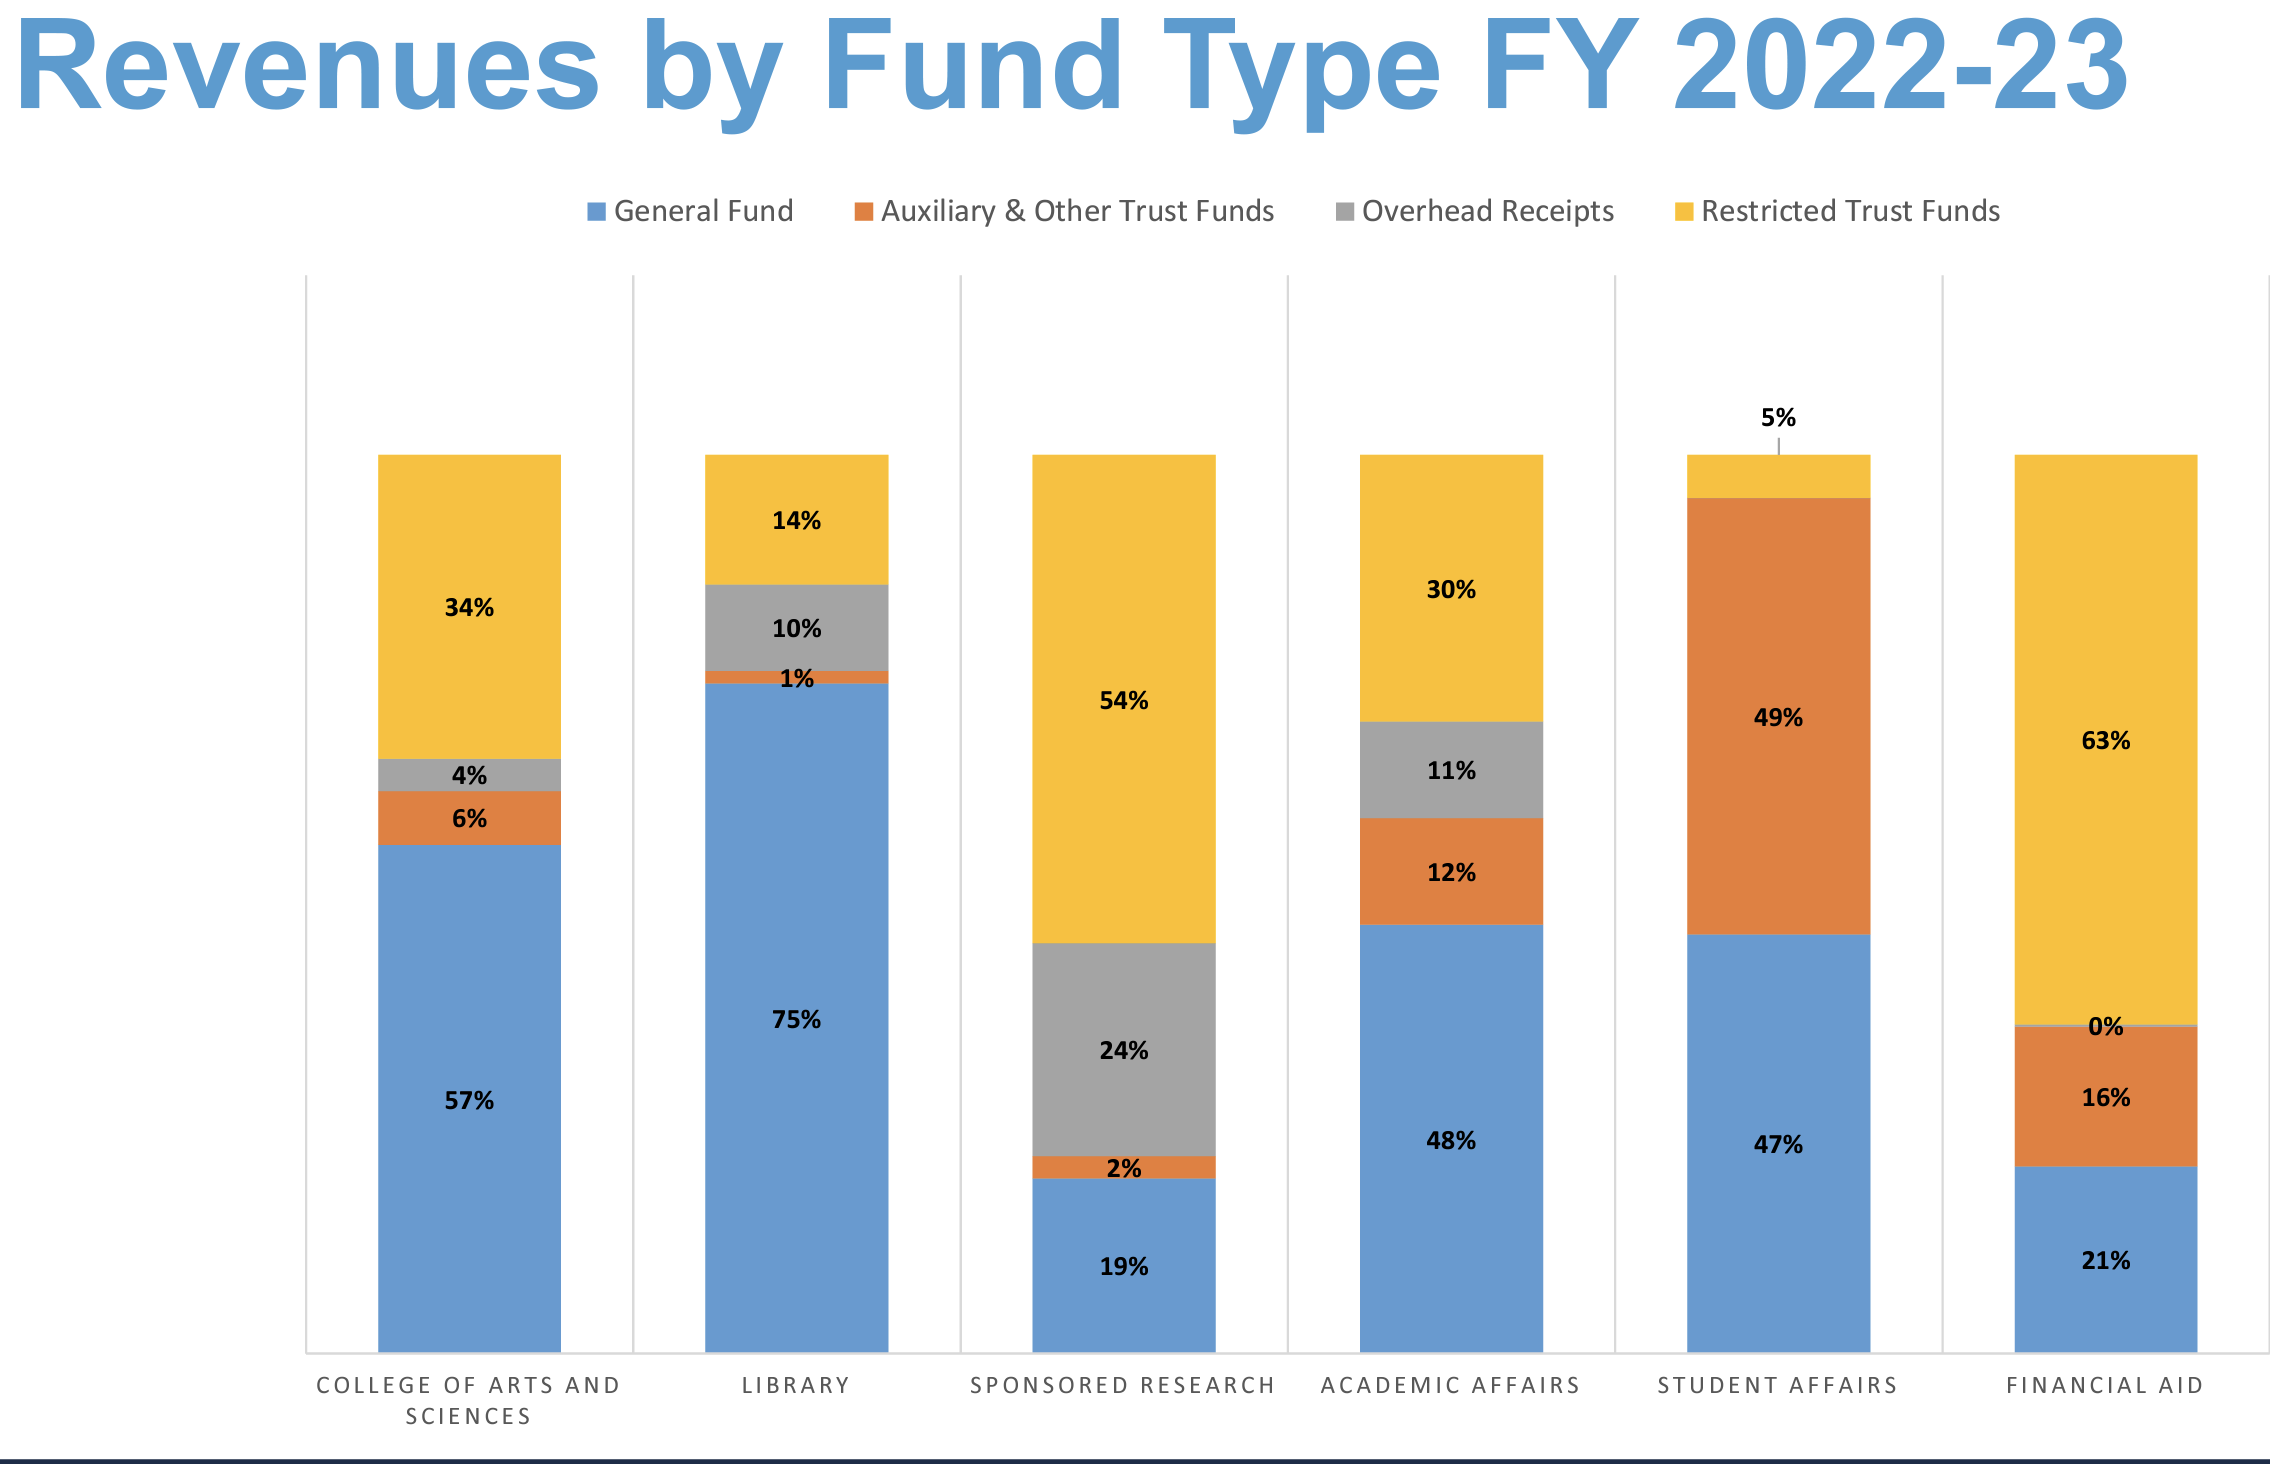 chart showing revenues by fund type